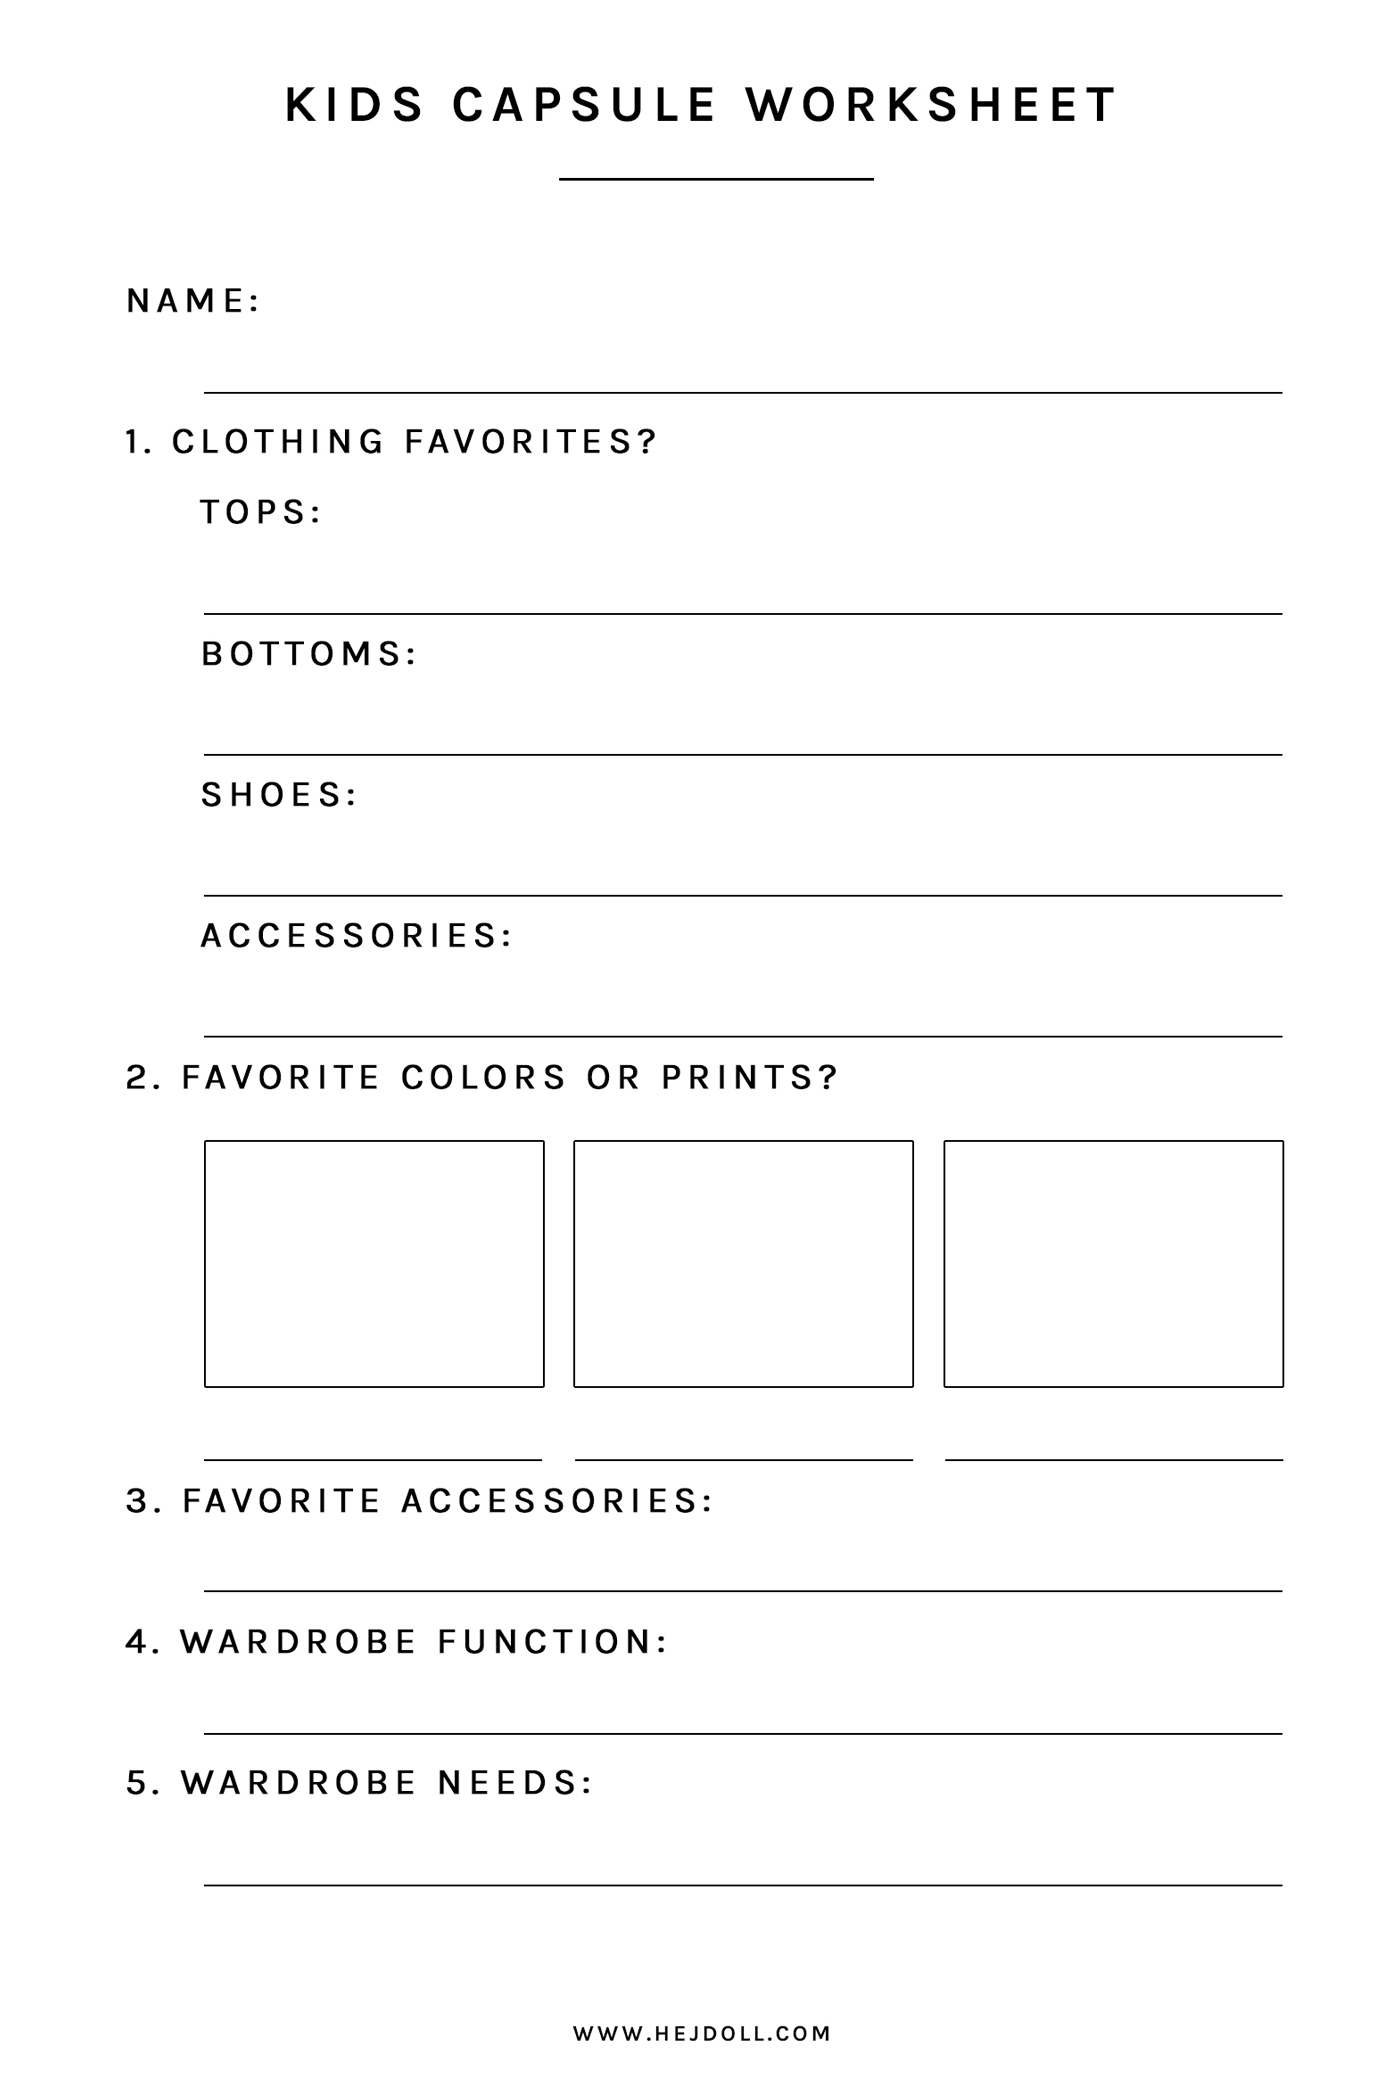 Back to School Capsule Wardrobe for Kids - A free downloadable worksheet to help you create the perfect back to school capsule wardrobe.